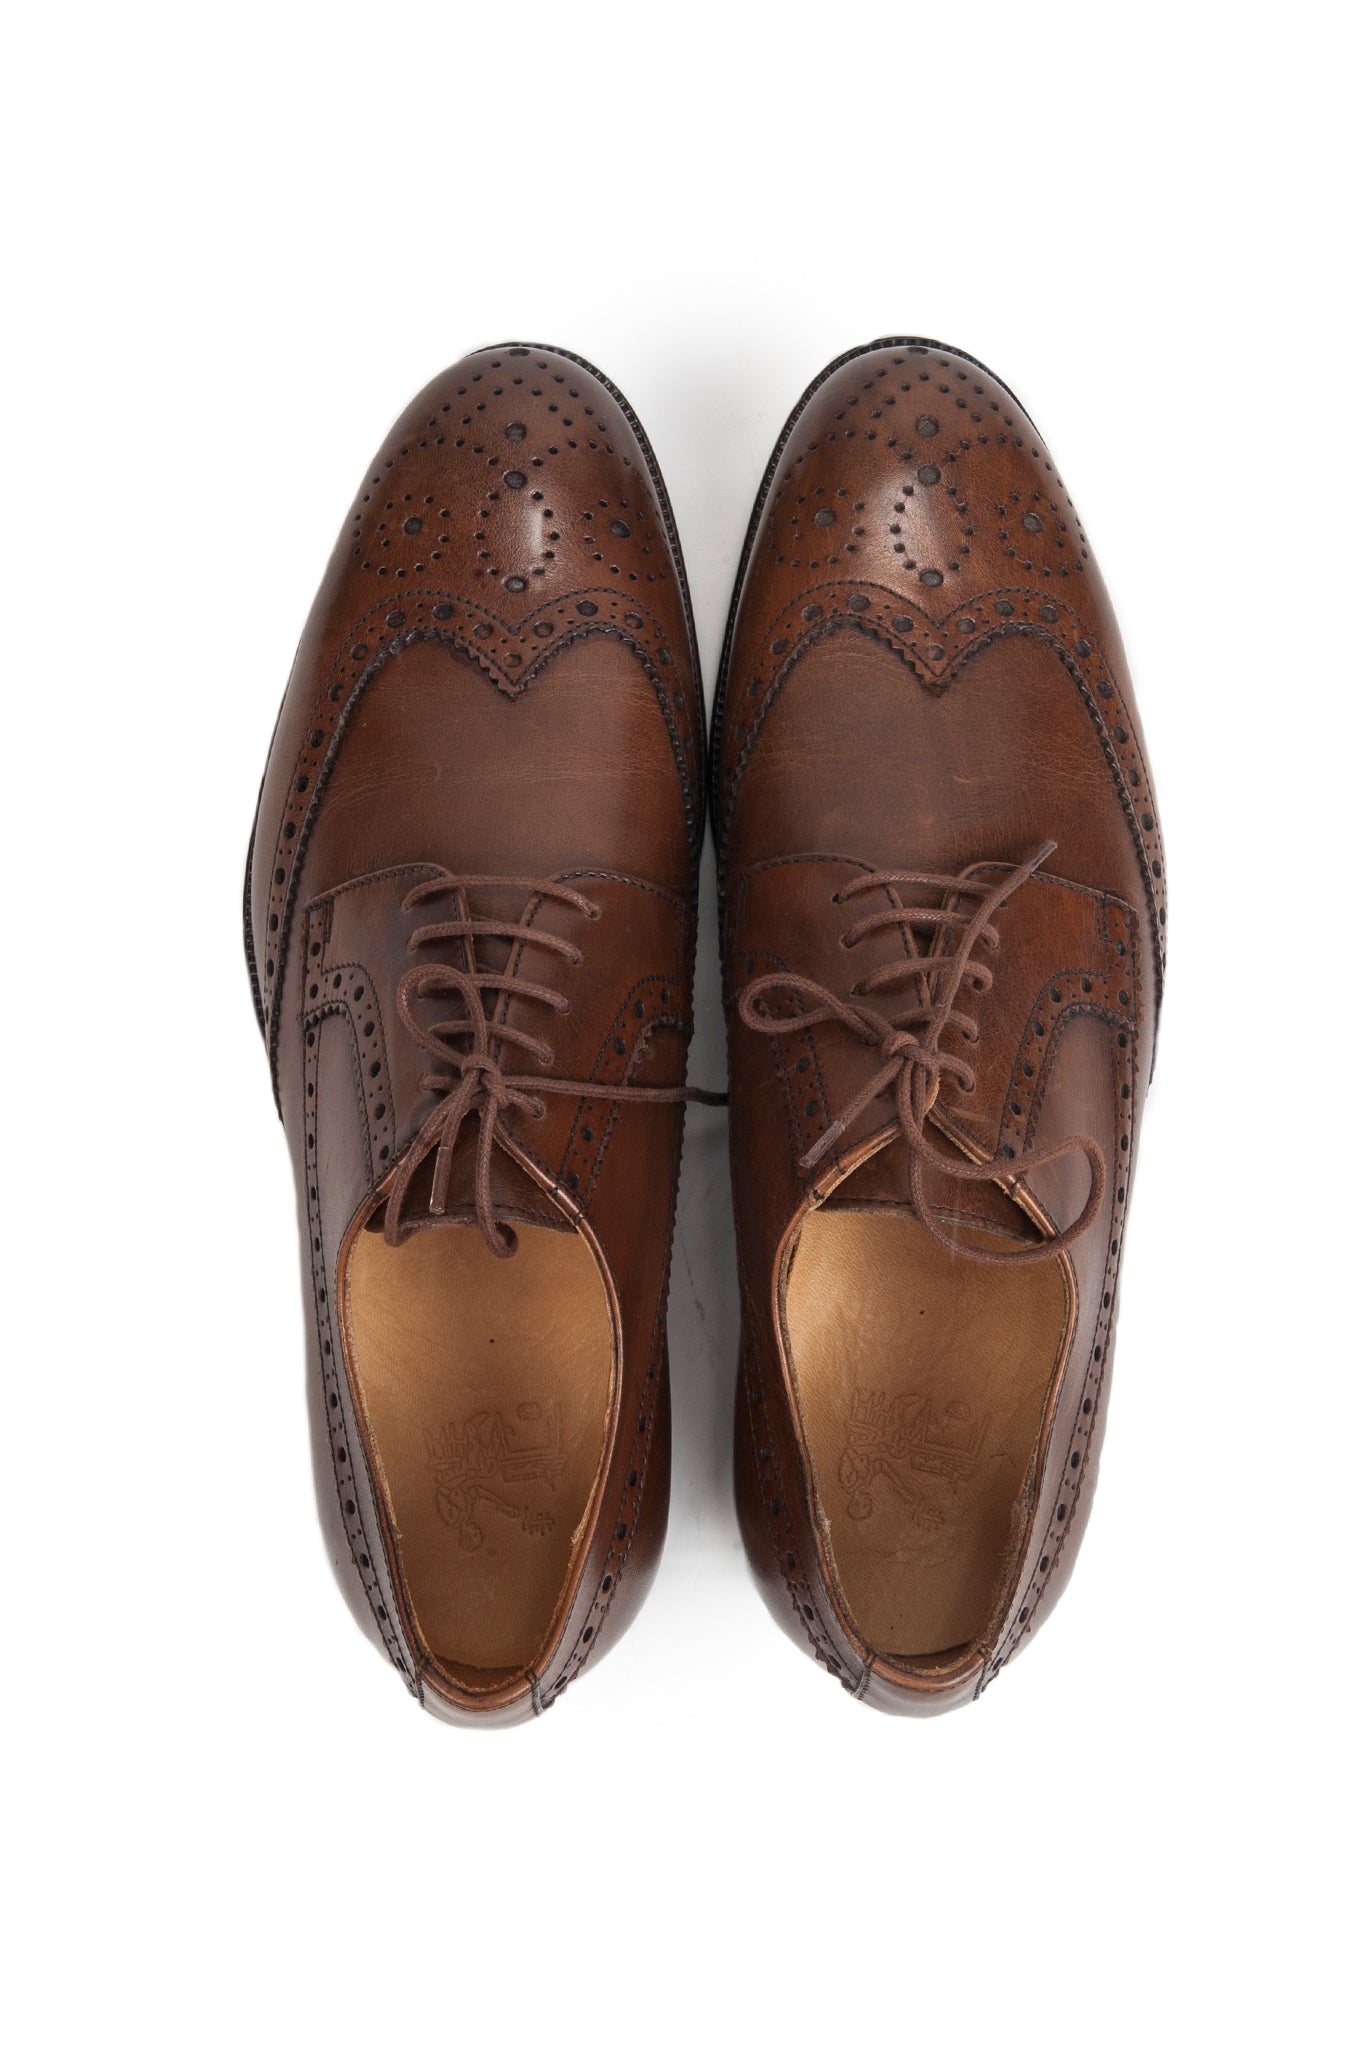 Brown Brogues for Men India Online